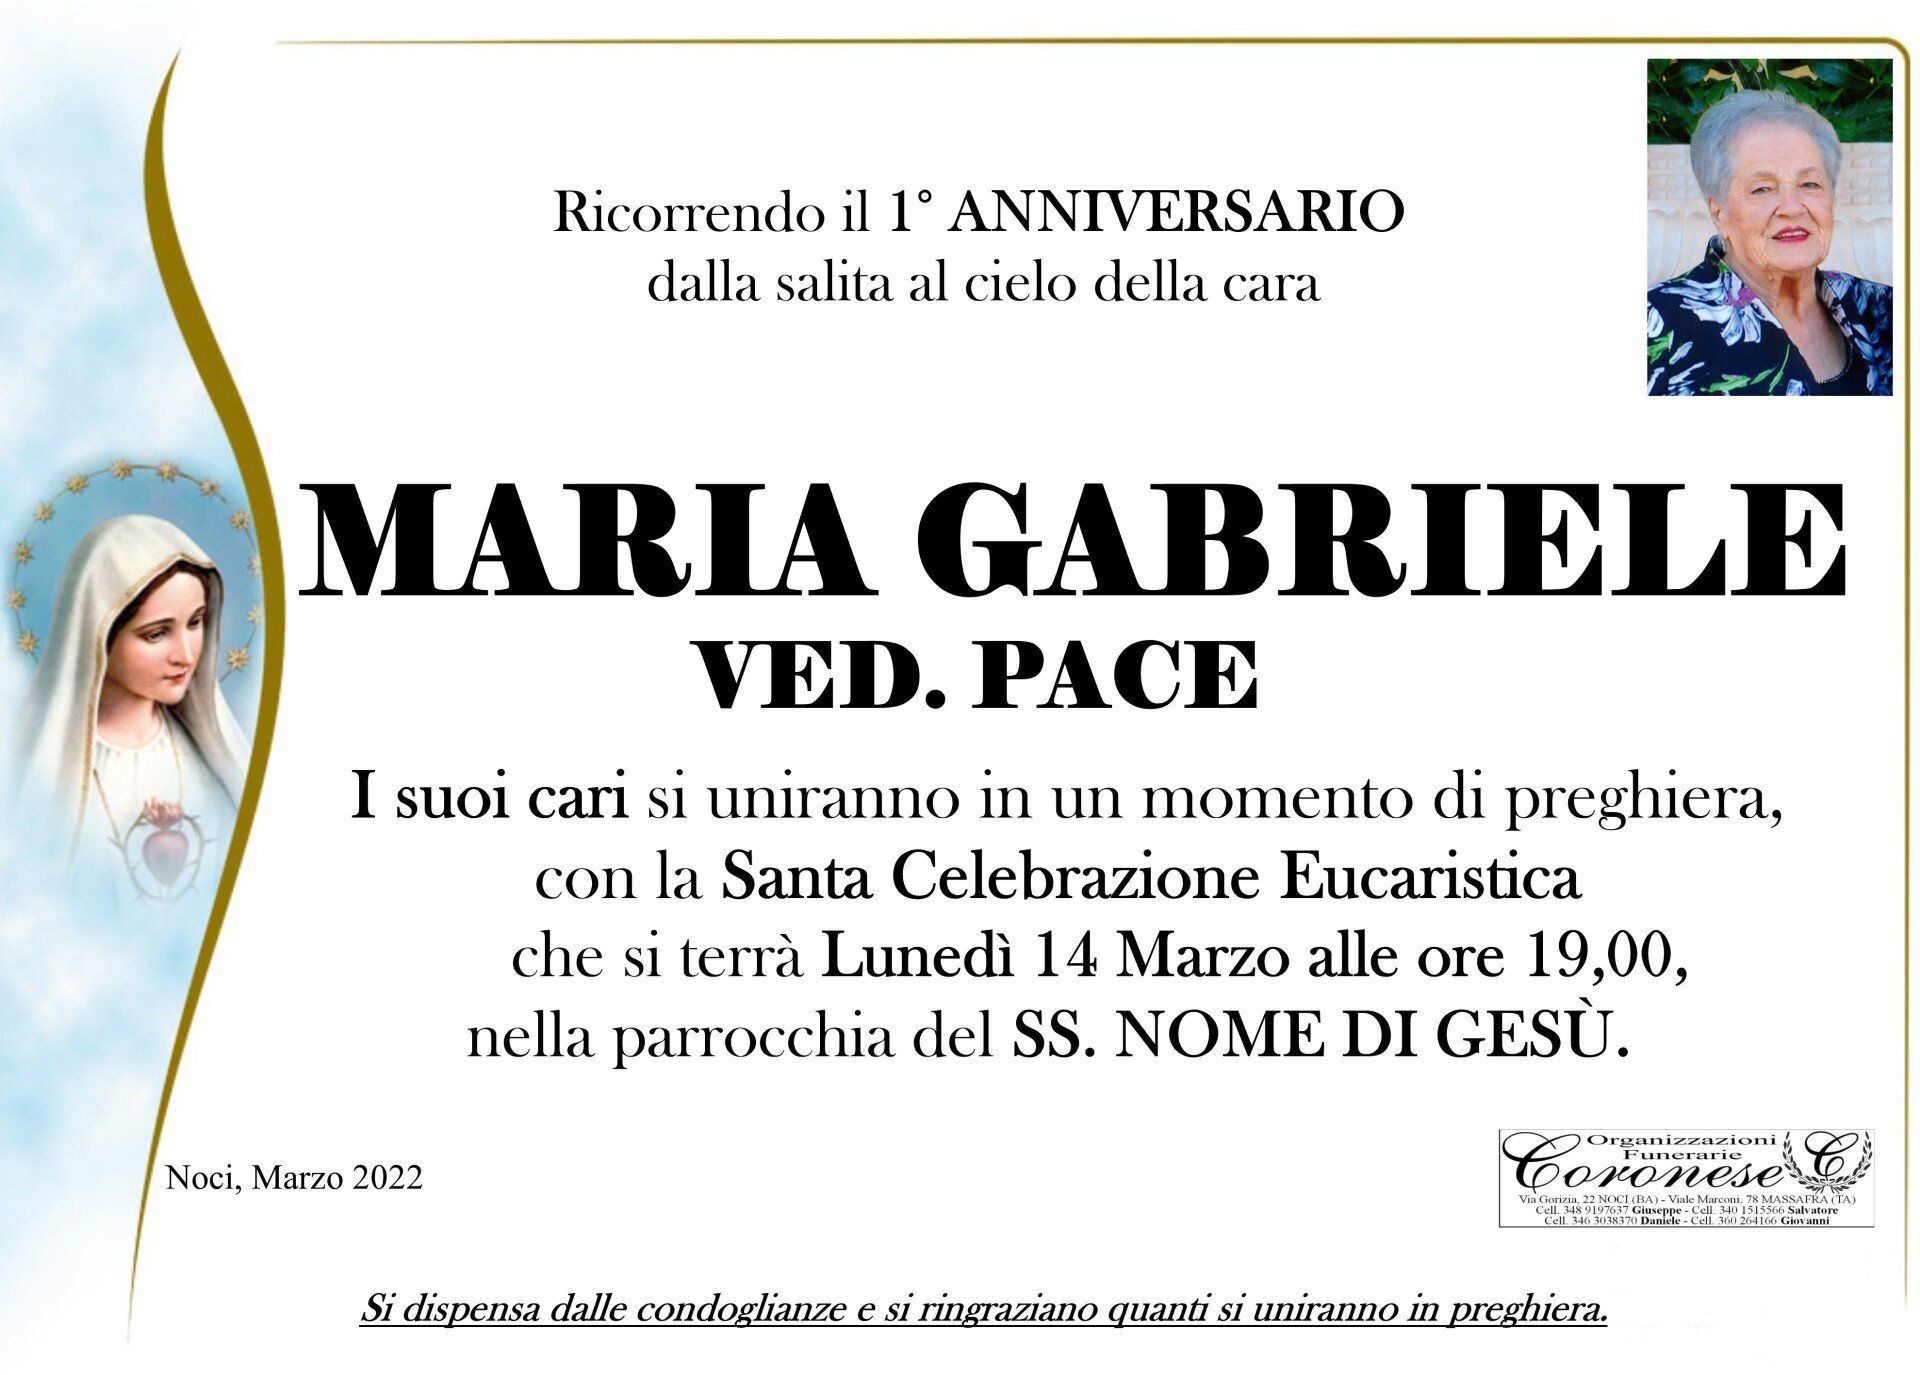 necrologio MARIA GABRIELE  Ved. PACE